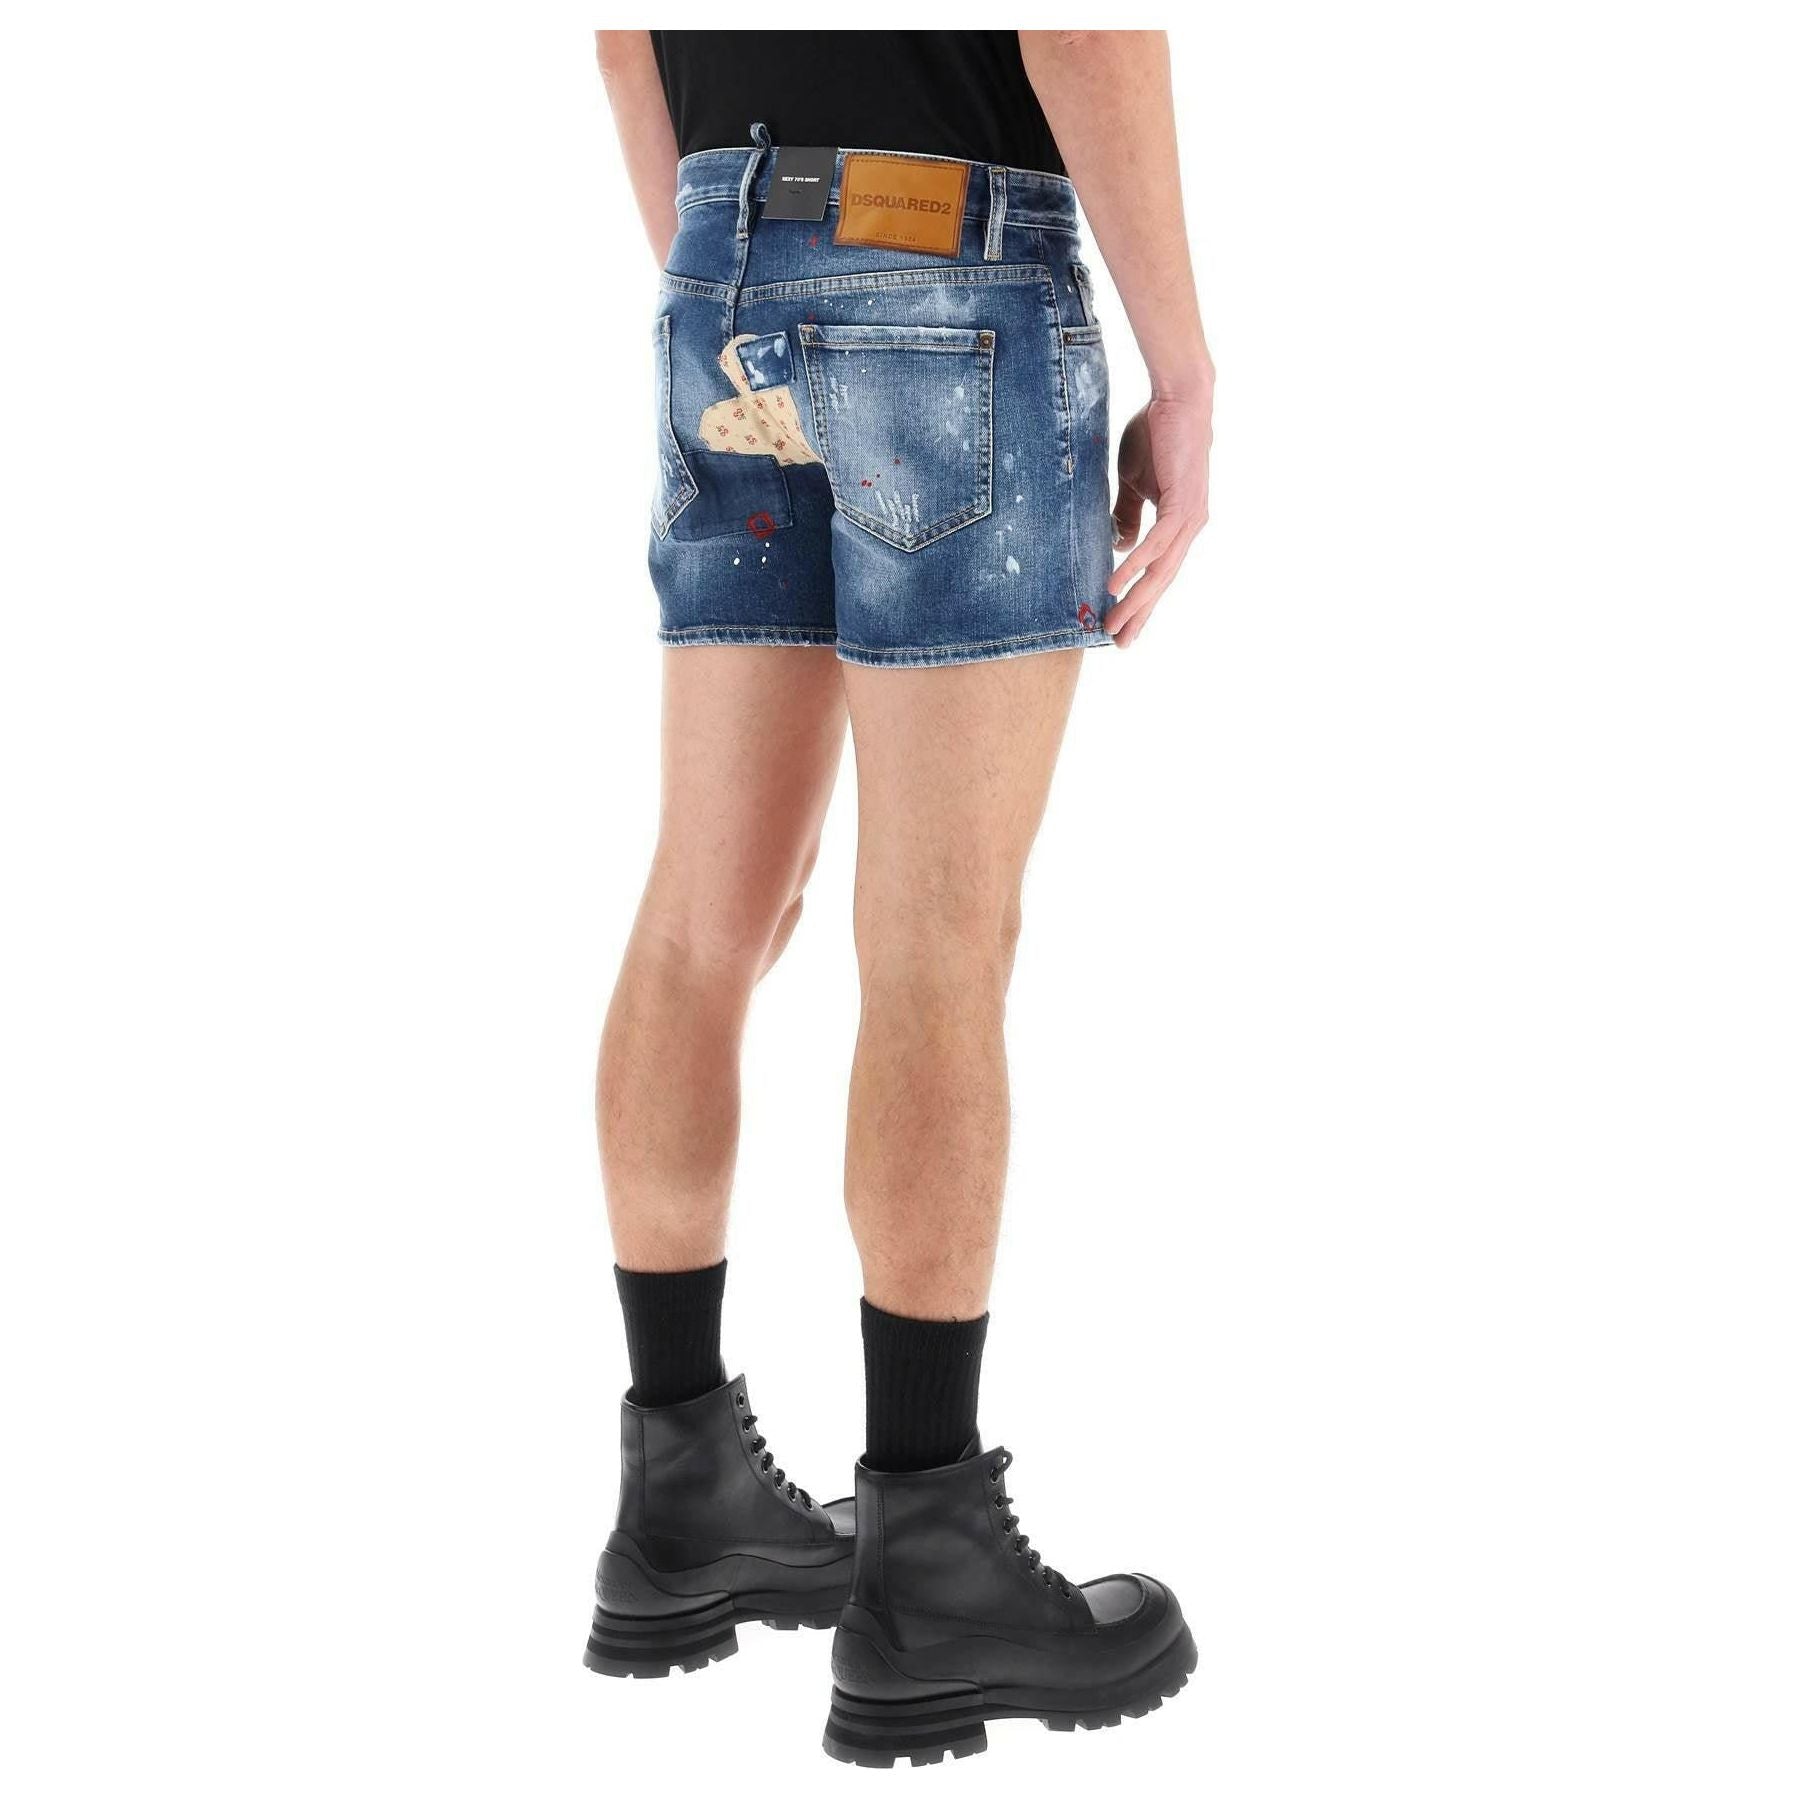 Sexy 70's Shorts In Worn Out Booty Denim DSQUARED2 JOHN JULIA.